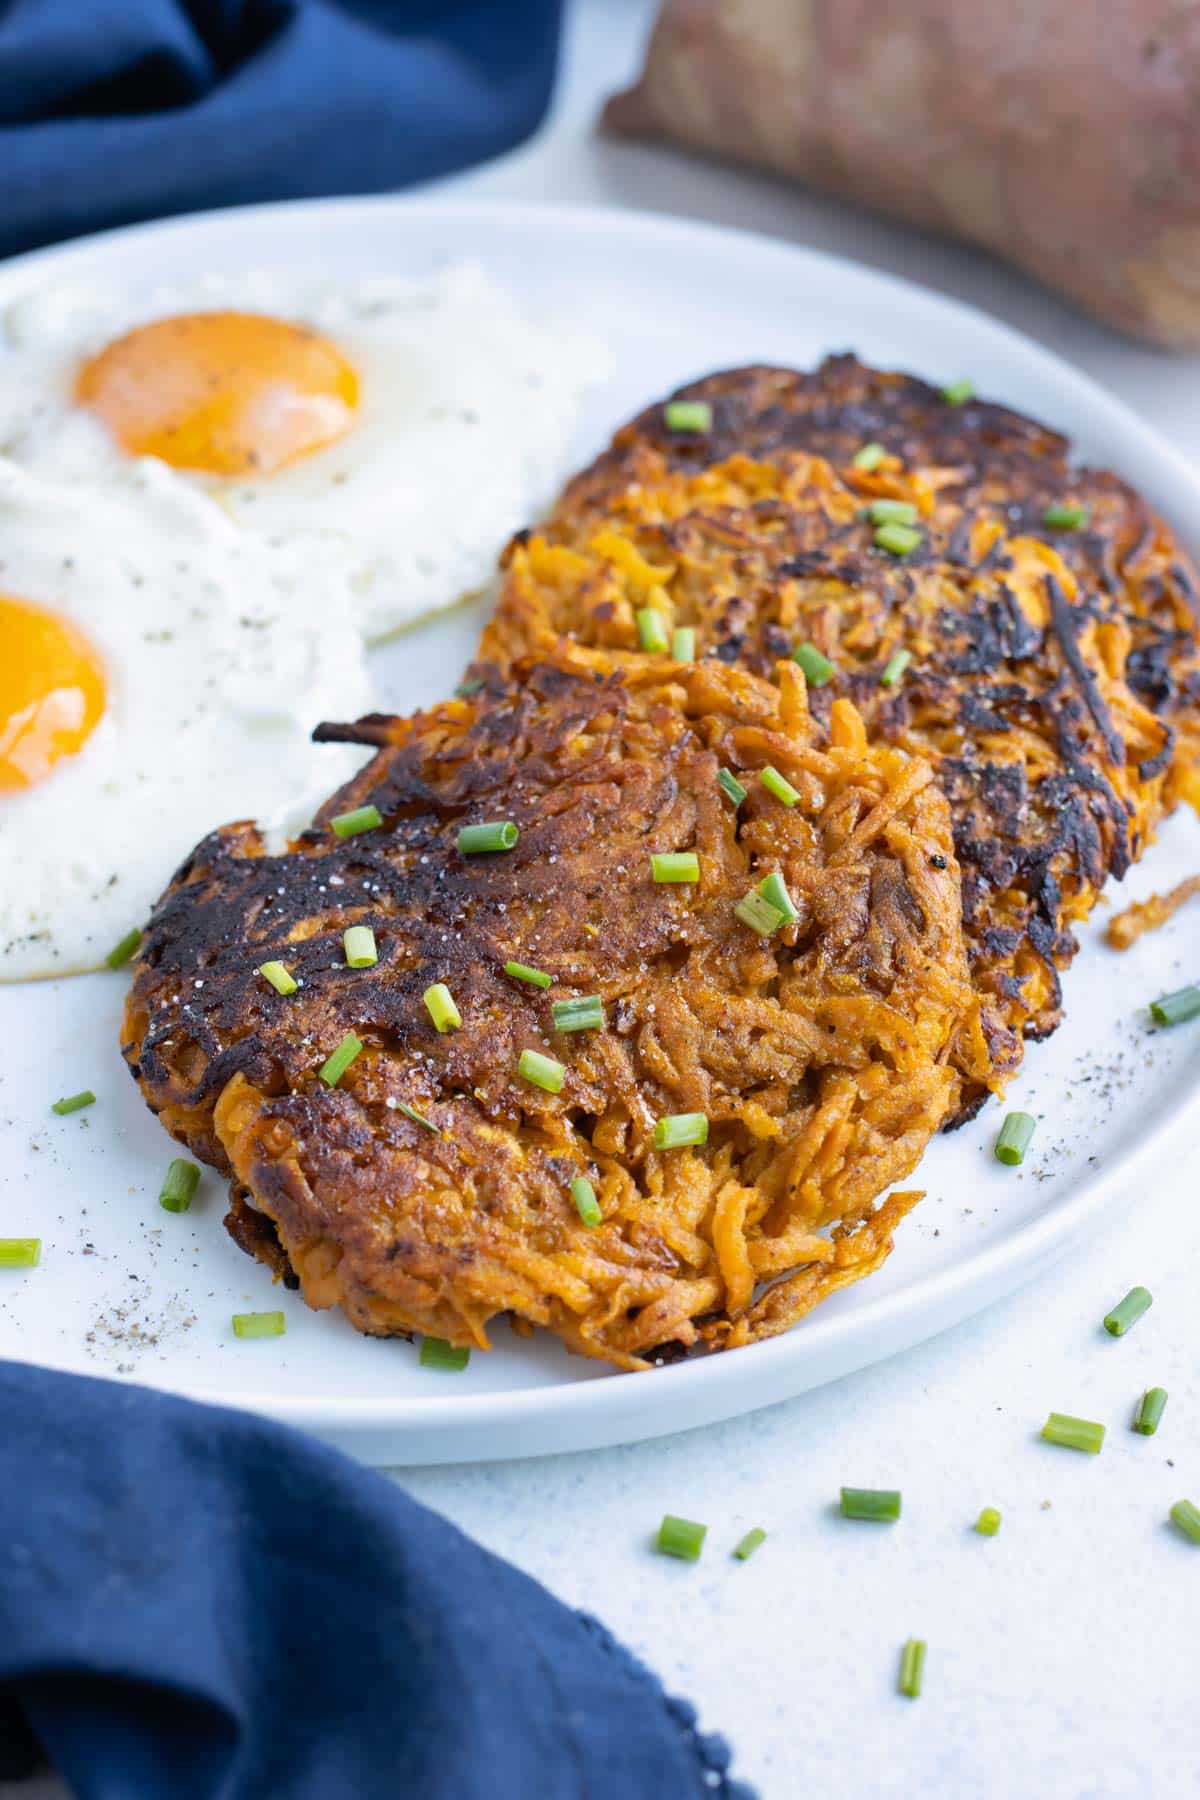 Crispy hash browns are served with fried eggs on a plate.